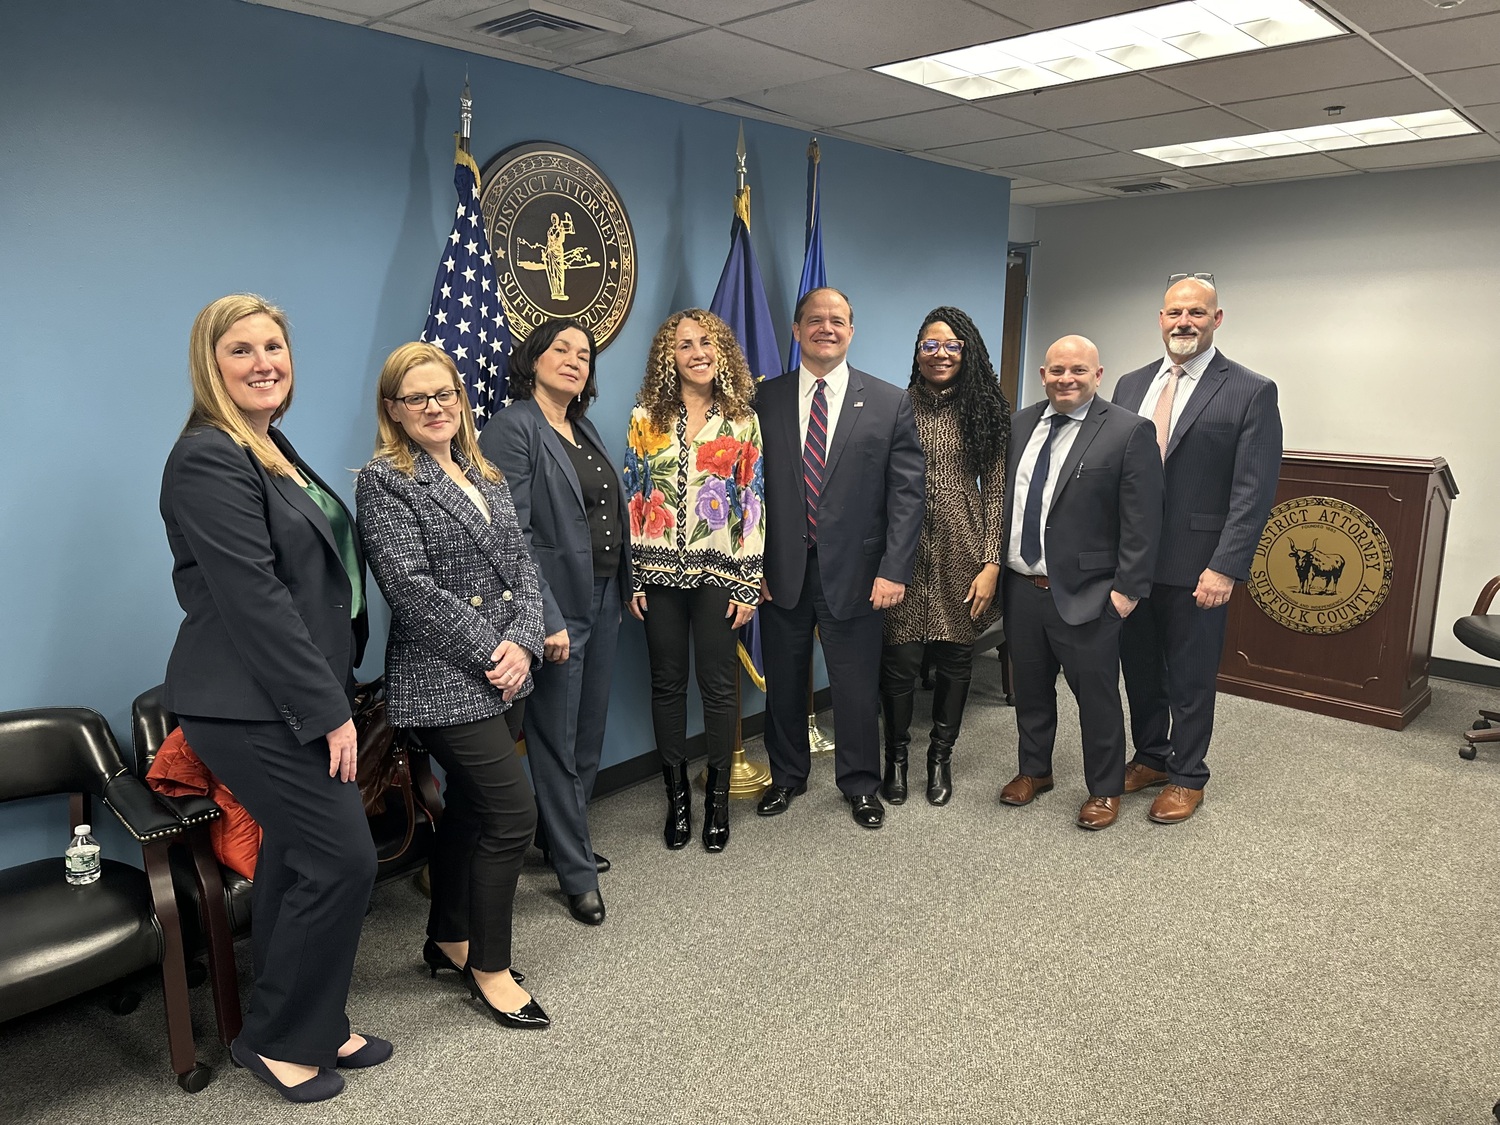 OLA Executive Director Minerva Perez, fourth from left, recently met with Suffolk County District Attorney Ray Tierney, fourth from right, along with OLA's General Counsel and Senior Policy Counsel Wanda Sánchez Day, and administrative judges of the New York State Unified Court System over two days. In their meeting with DA Tierney and key members of his staff, including investigators, domestic violence and trafficking specialists, and a community liaison, Perez and Sánchez Day
brought suggestions to the table related to language access, child sexual assault/abuse investigation practices, scam protection for prospective homebuyers, and maintaining a direct line of communication between the DA’s
office and OLA. For years OLA has been in conversation with the District Attorney’s office and the leadership of the 10 East End Police departments to understand the intricacies of these institutions’ operations, with the goal of creating more transparency and helping them better serve East End community members. COURTESY OLA